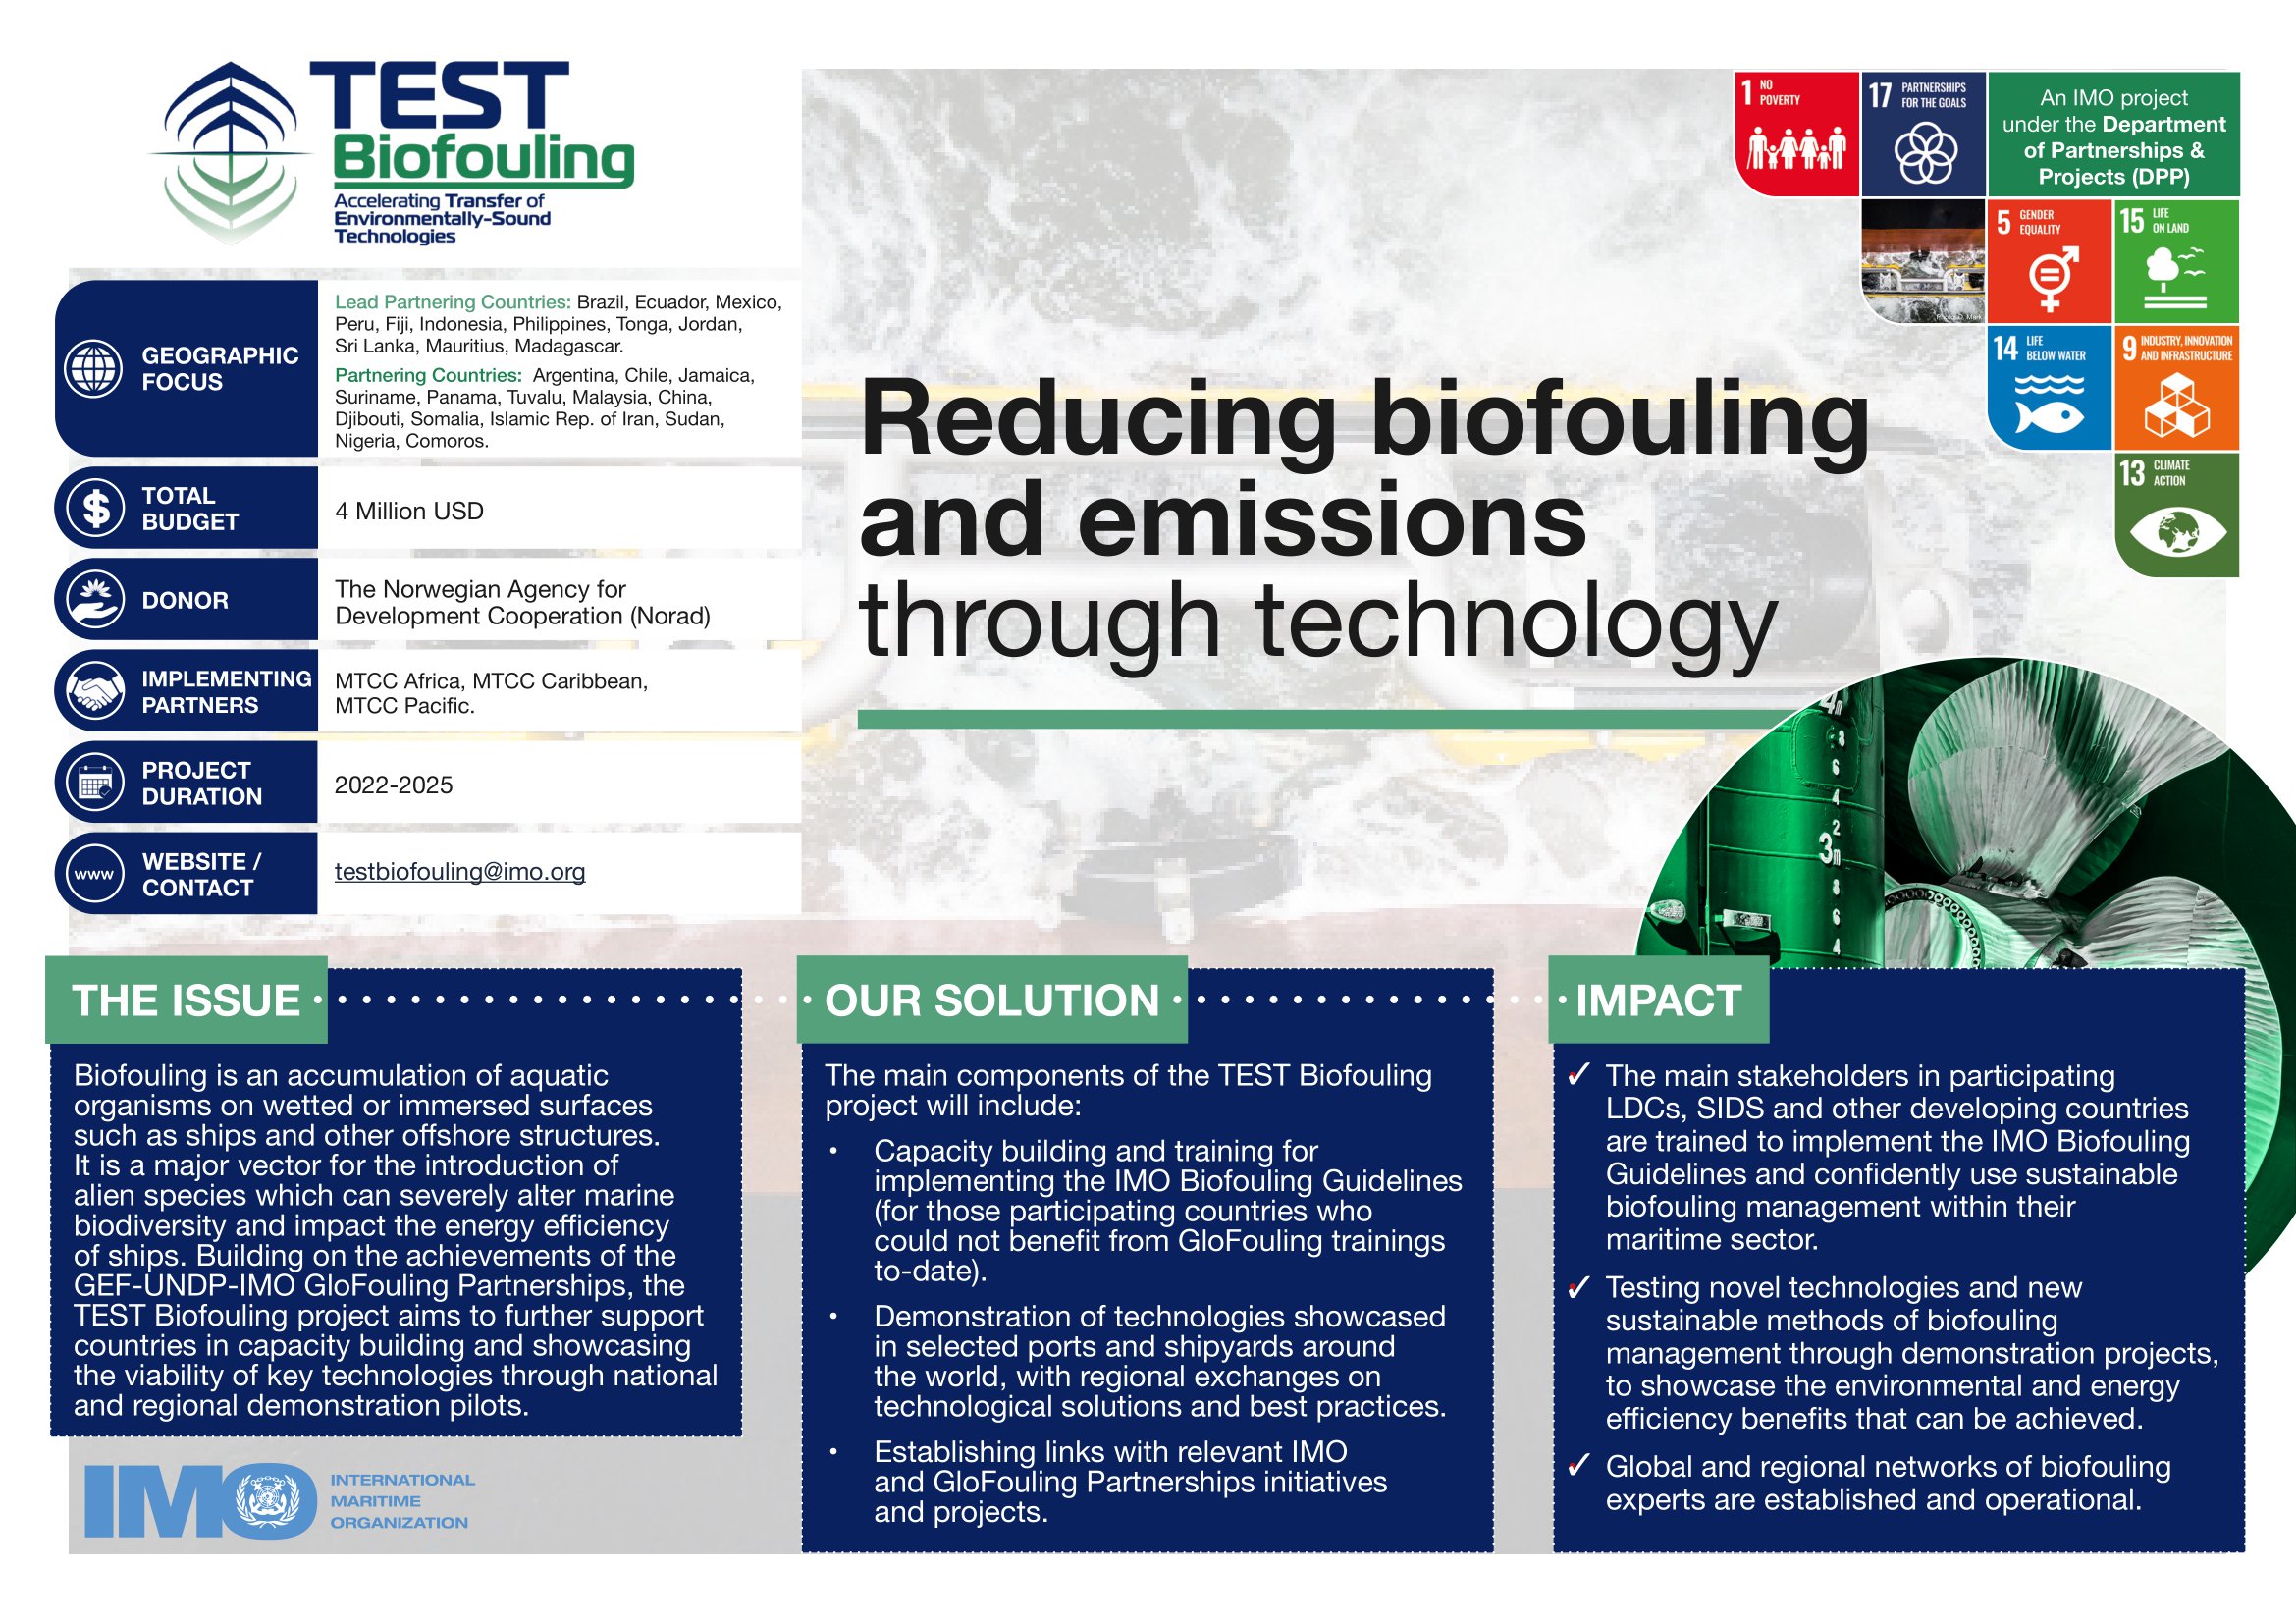 DPP one-page fact sheets_(19-06-23)_TEST Biofouling.jpg